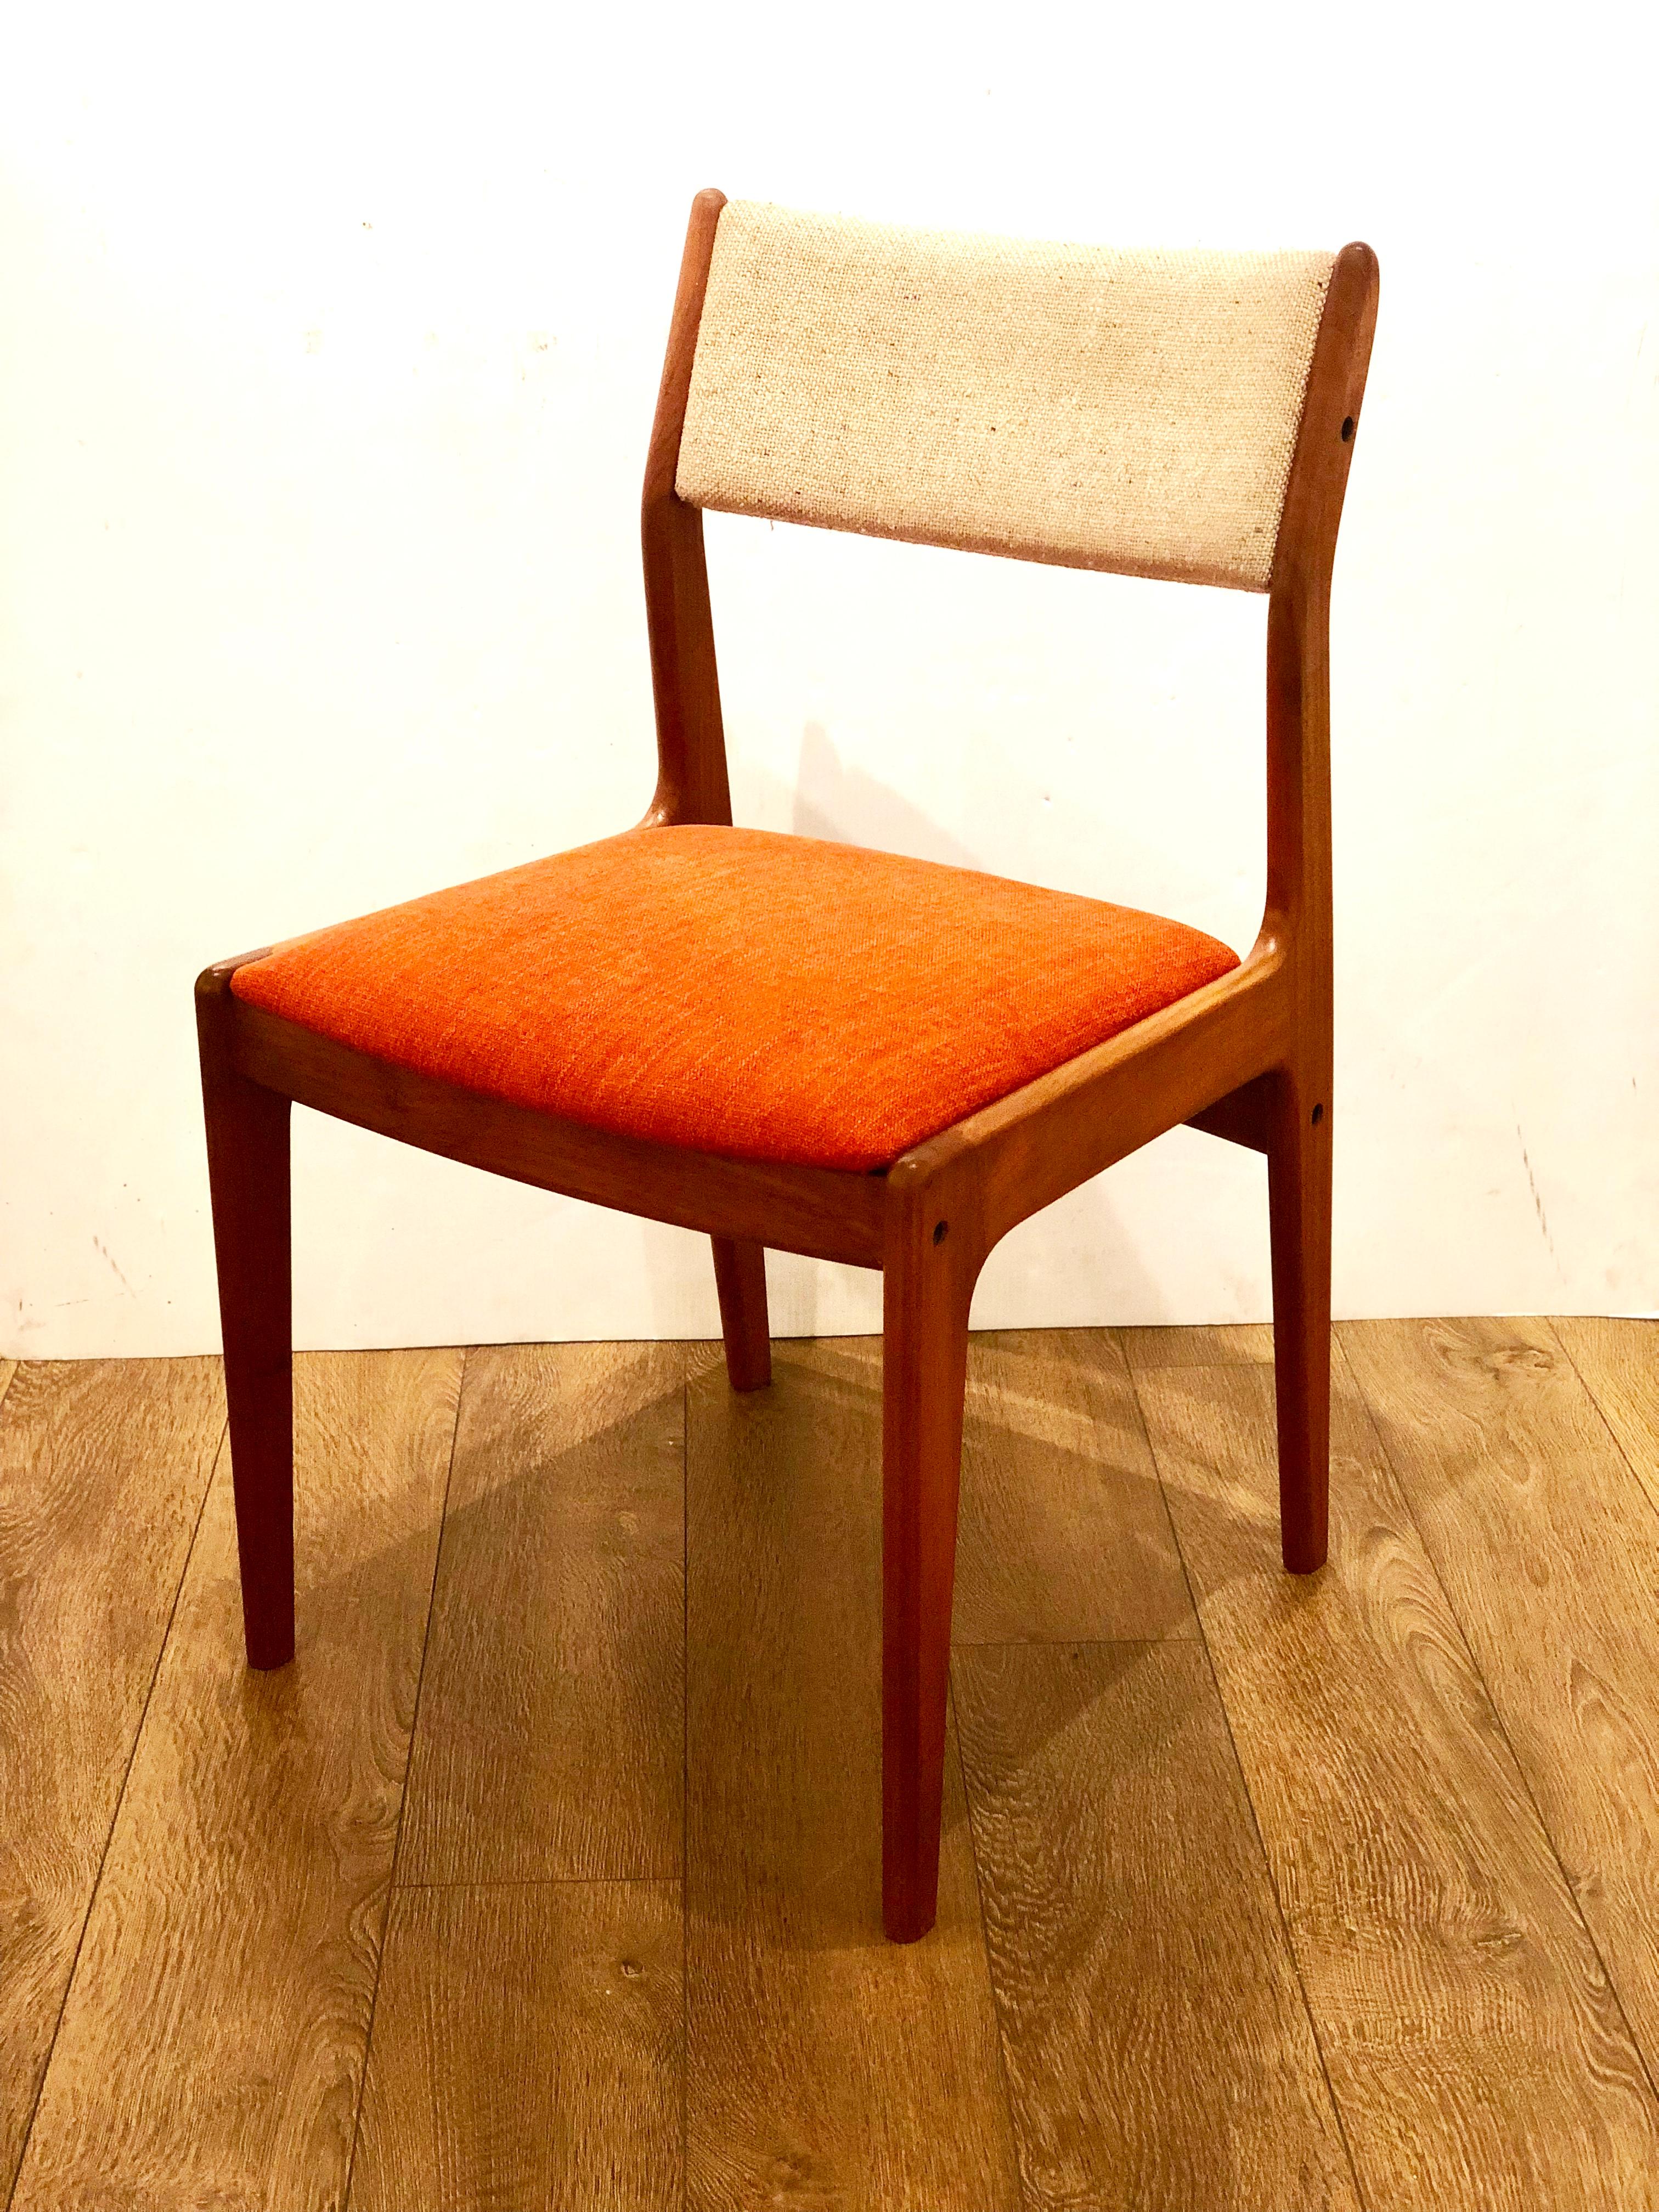 Nice solid teak set of four dining chairs, freshly recover seats with orange fabric, and original oatmeal color back rest, circa 1970s, well construction nice dovetail detail junctions.